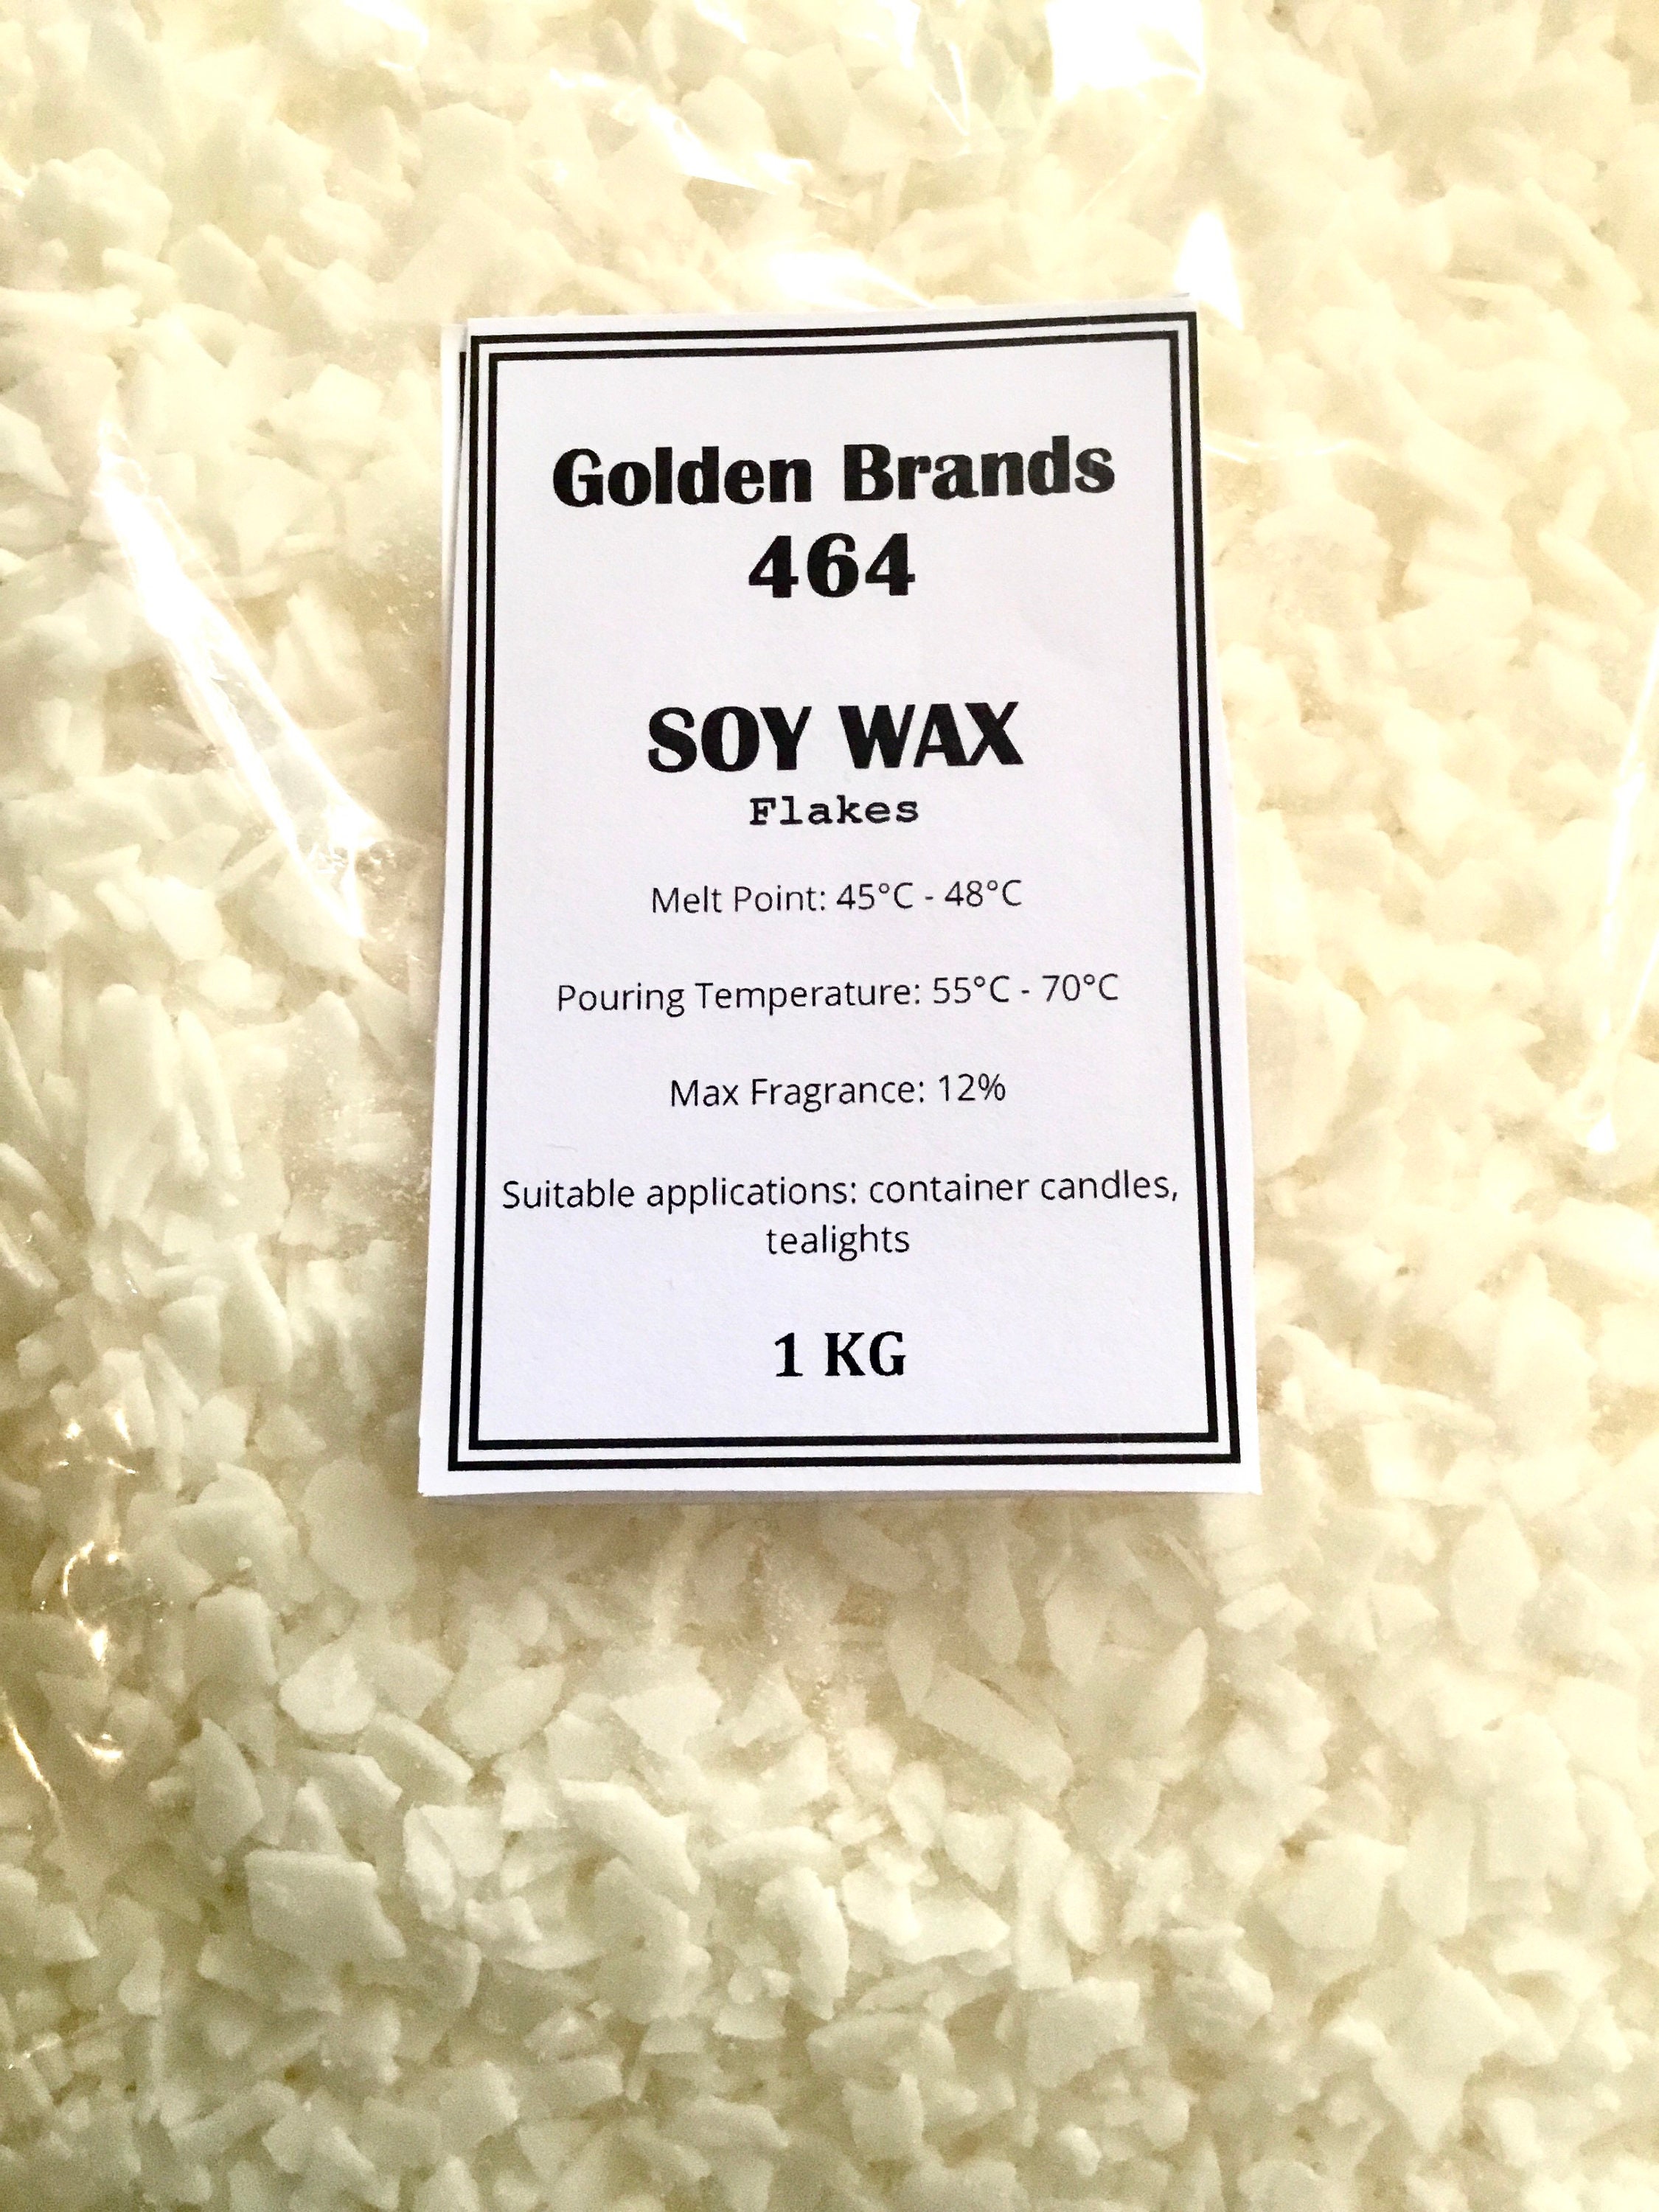 Golden Brands Natural Soy Wax Flakes 464 1 KG, 5KG Candle Making Supplies 